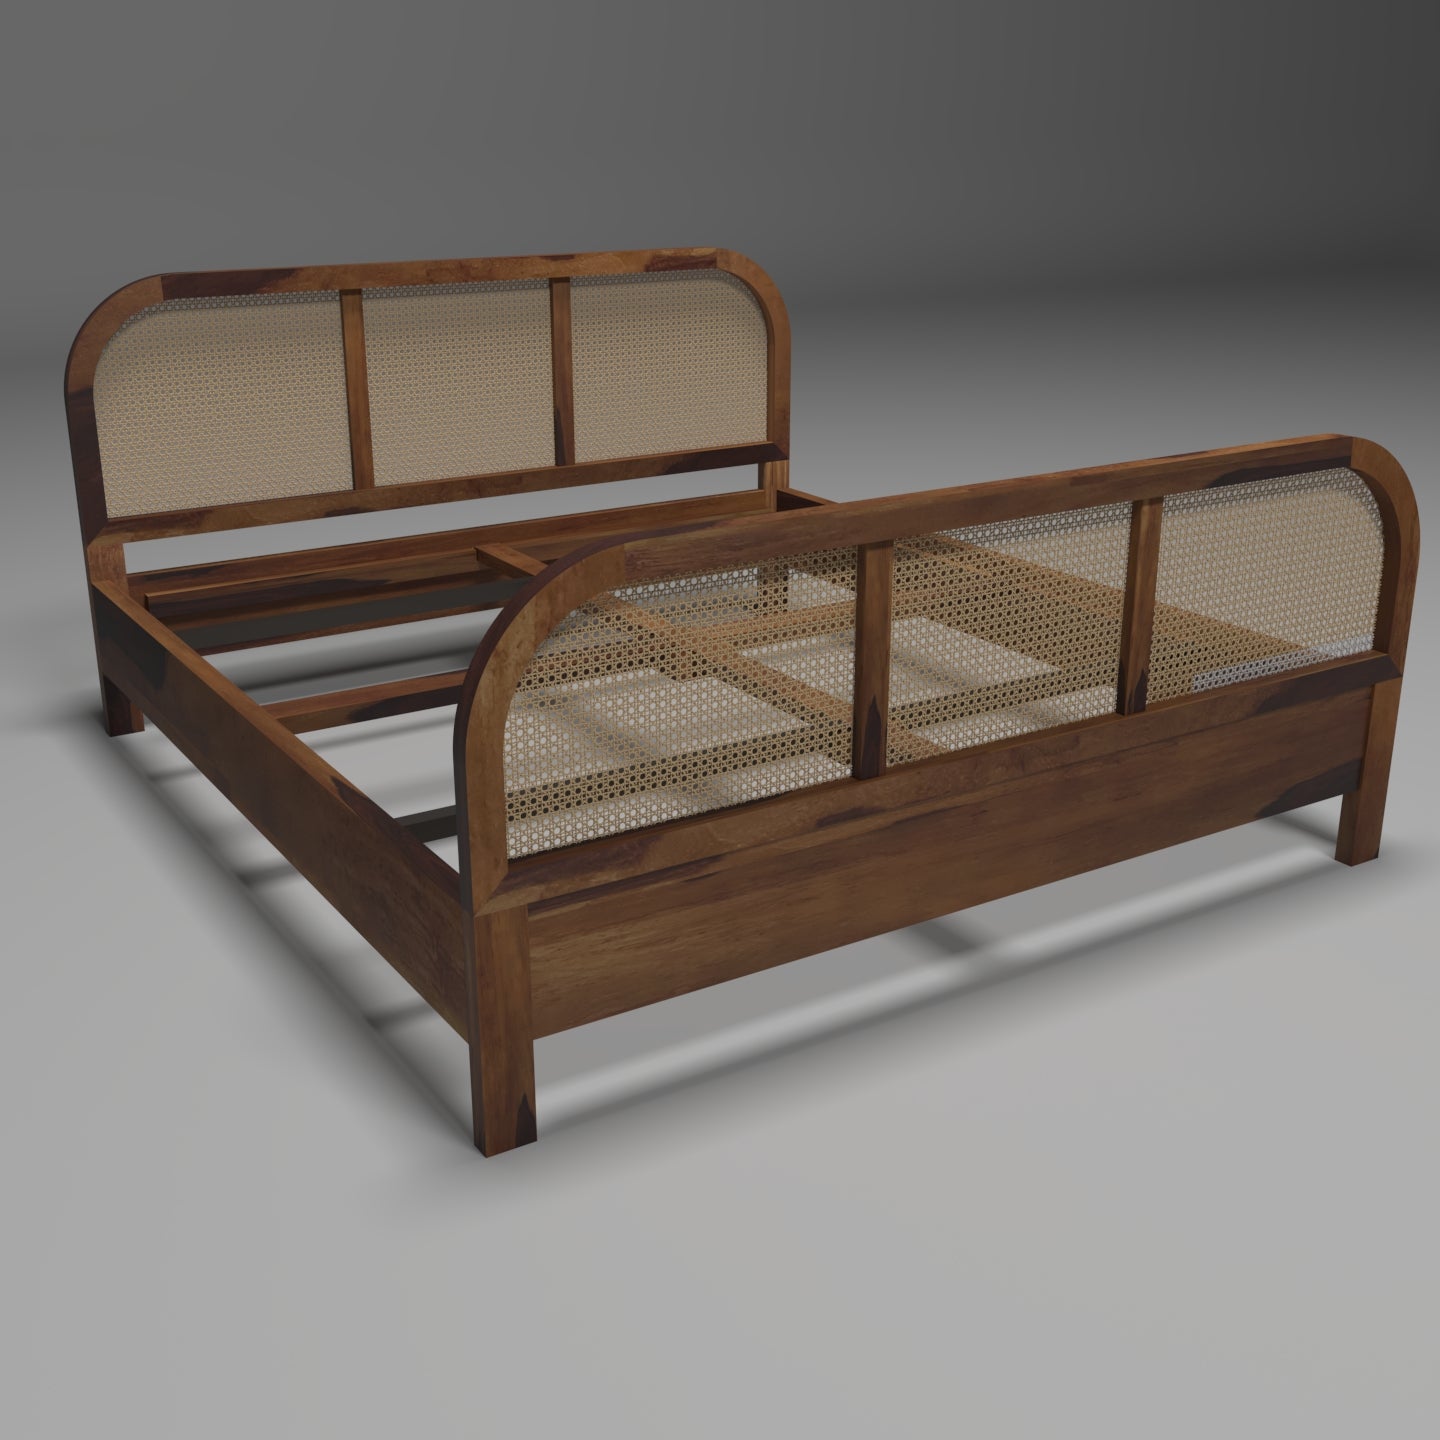 Sheesham curved arch solid wood king size bed Bed